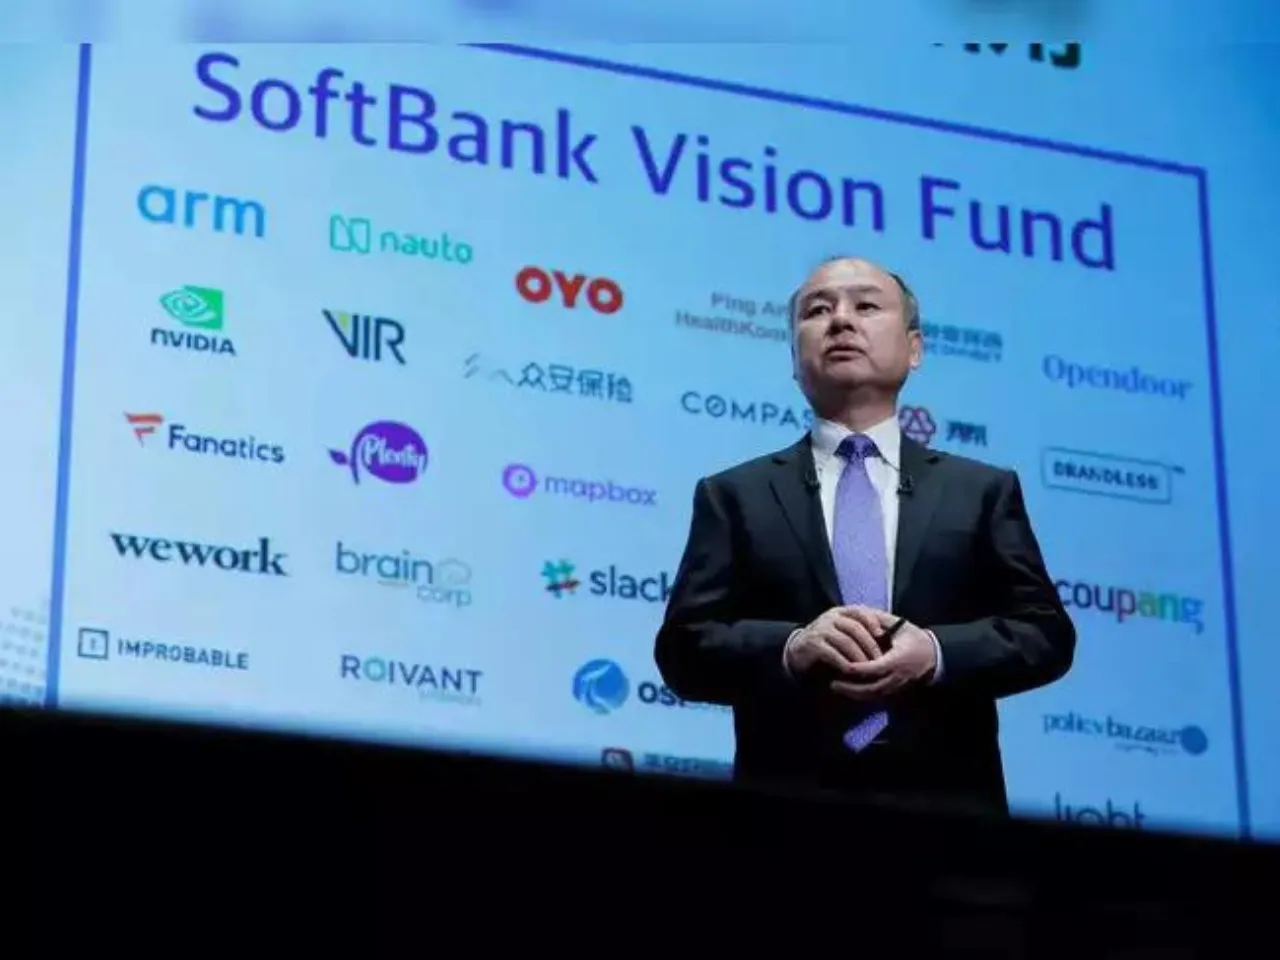 SoftBank's Vision Fund reports losses, Masayoshi Son liable for $5.2B